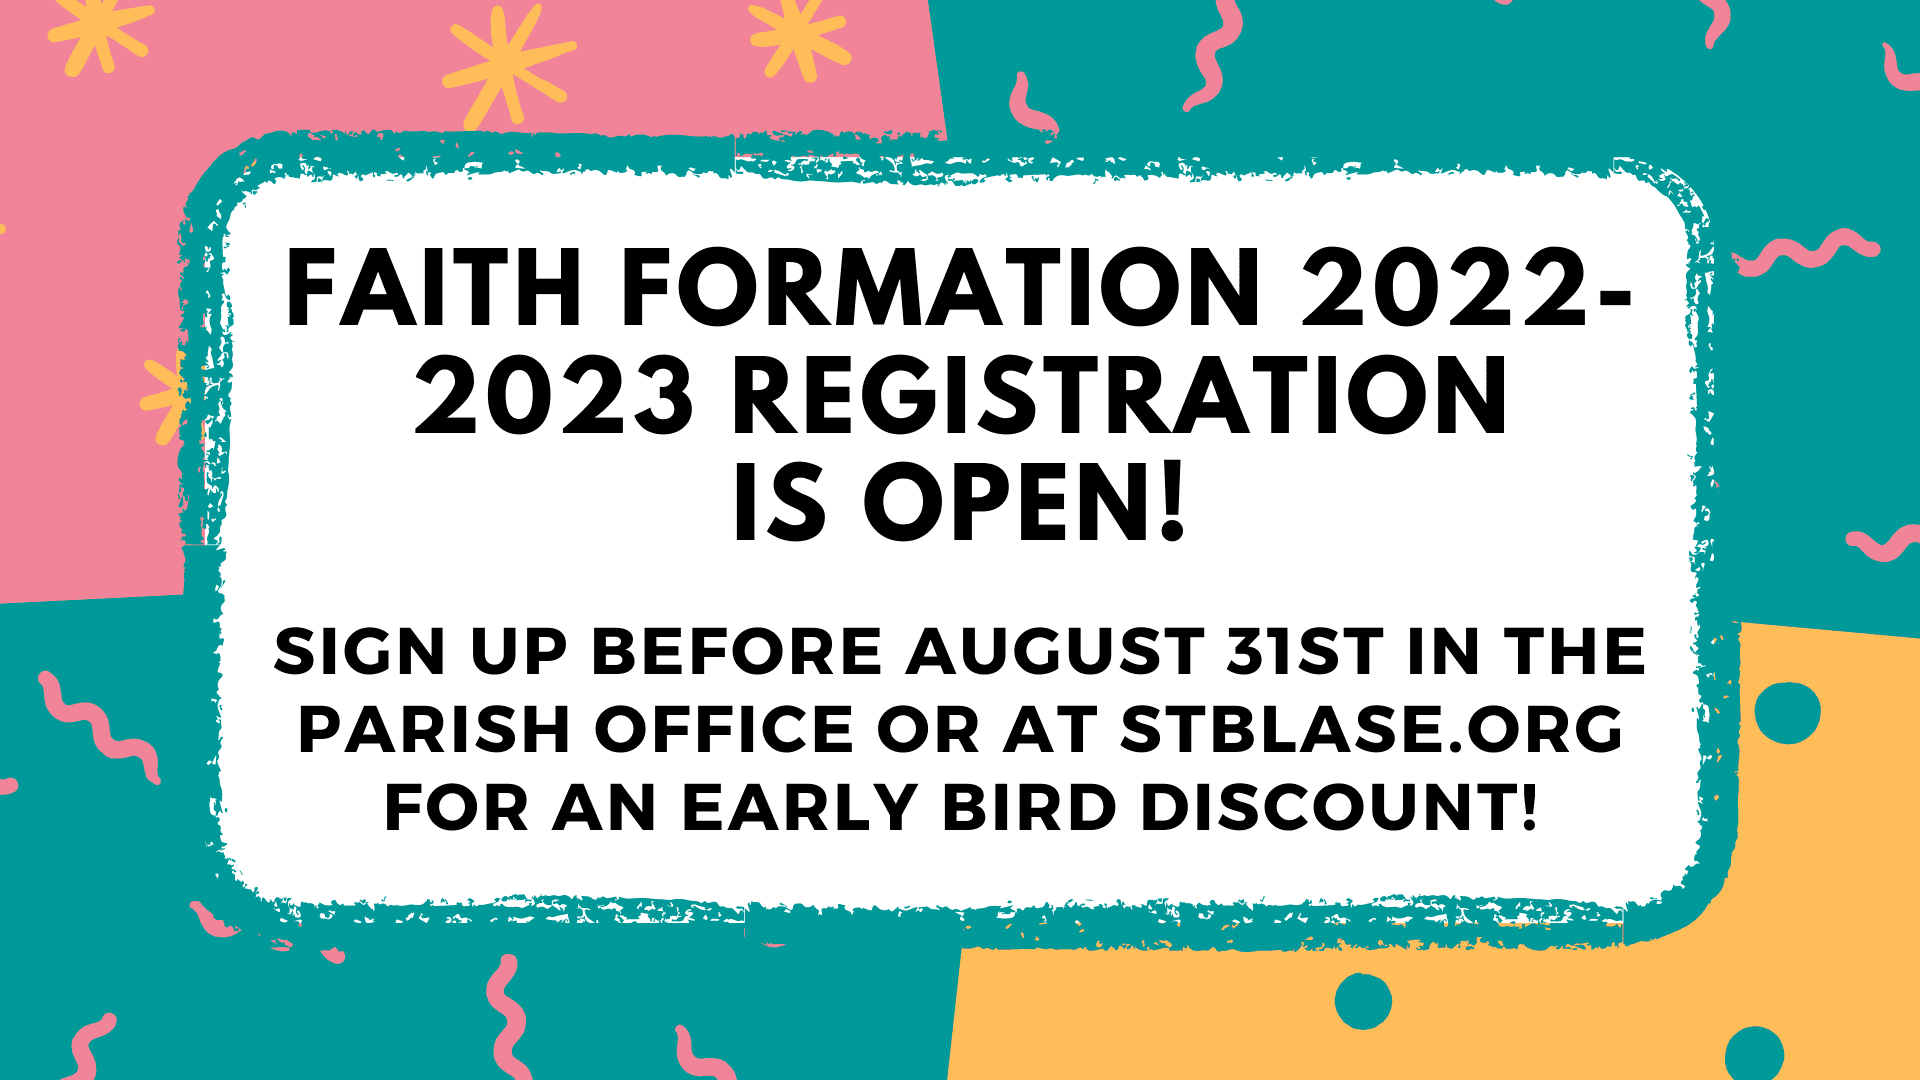 Faith Formation 2022-2023 registration is open! Sign up before August 31st in the Parish Office or at stblase.org for an early bird discount!